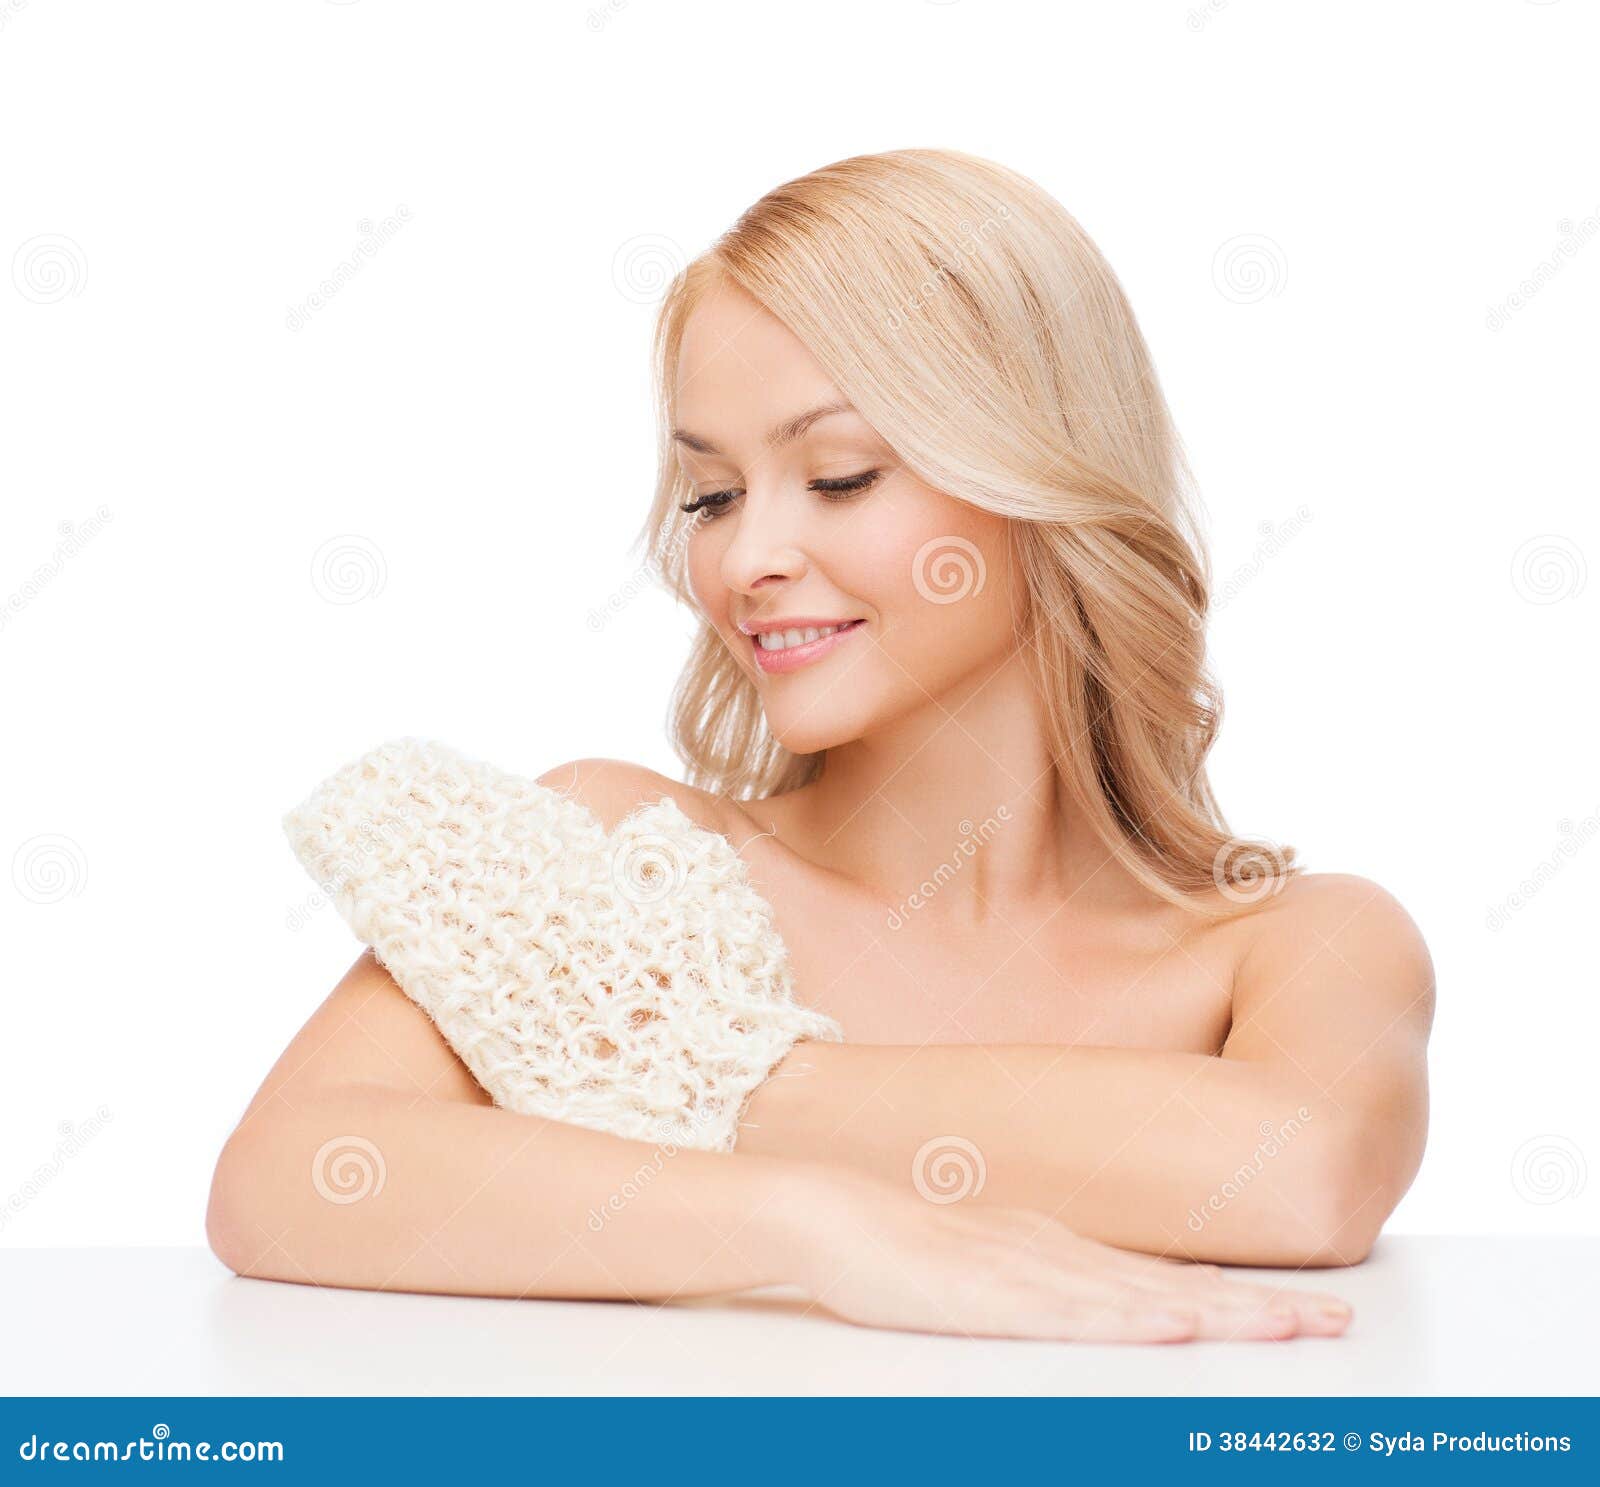 smiling woman with exfoliation glove